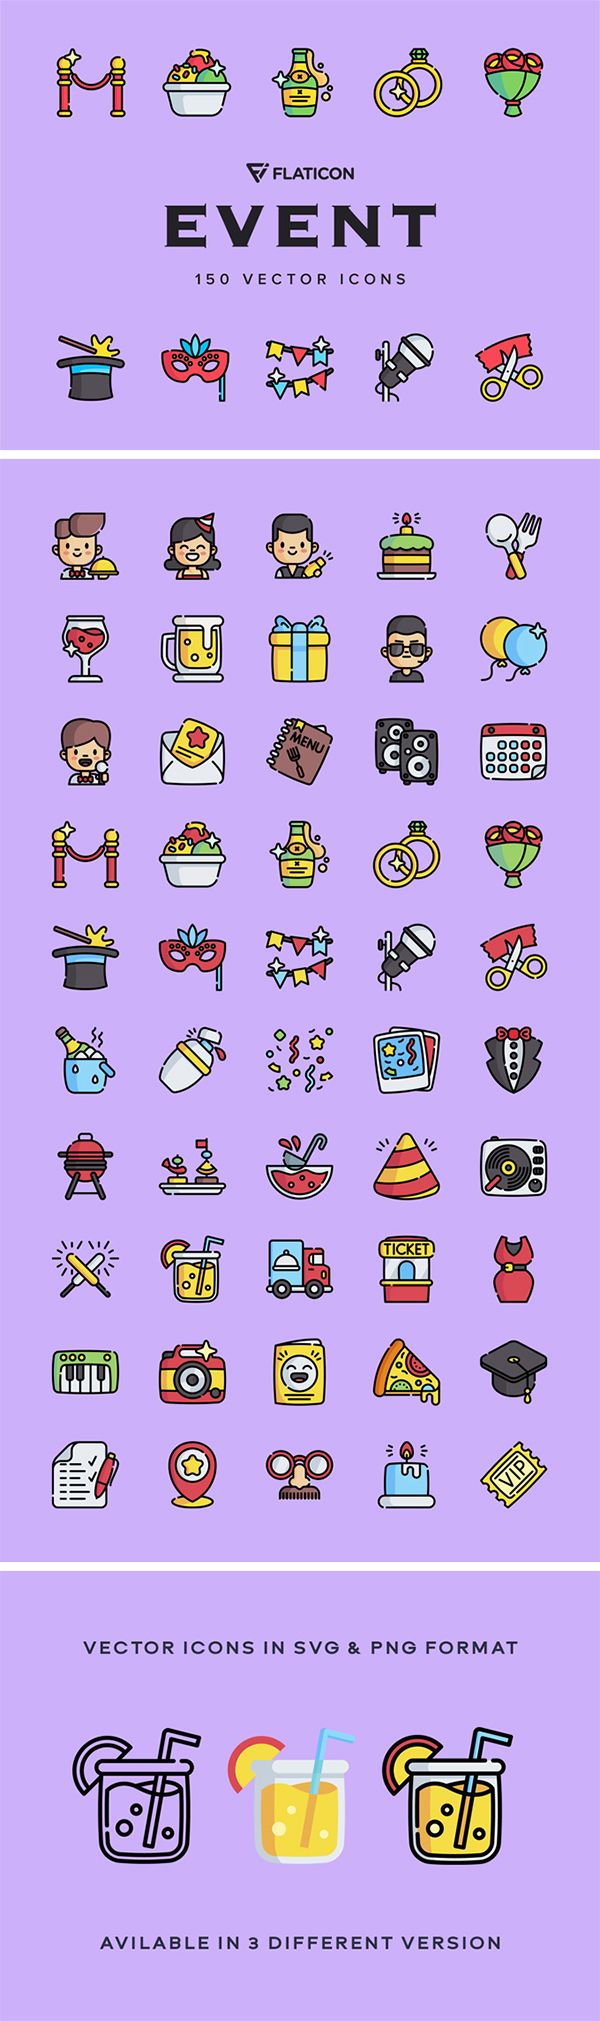 Event Vector Icons